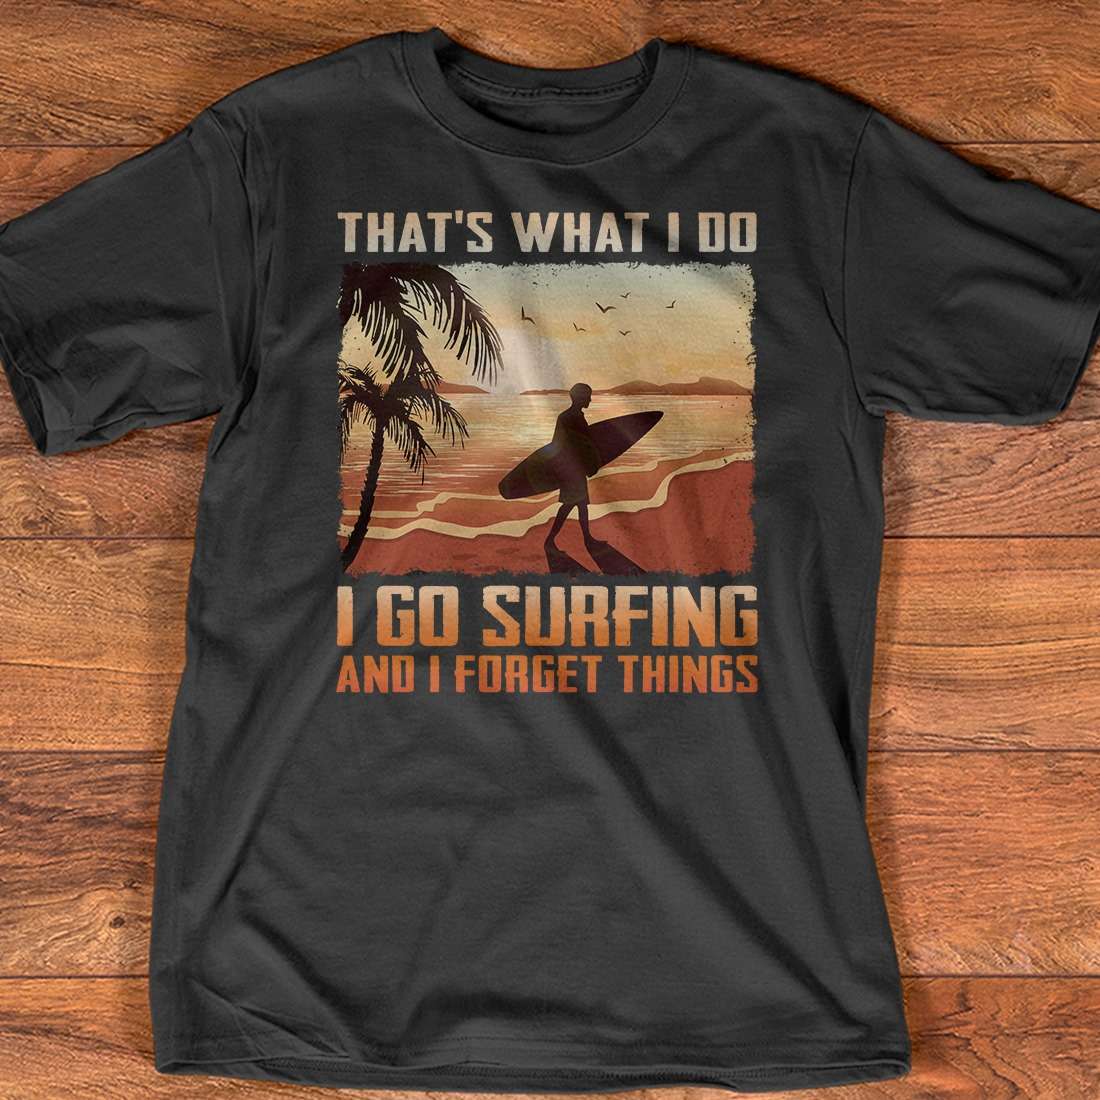 That's what I do I go surfing and I forget things - Wave surfing, summer sport